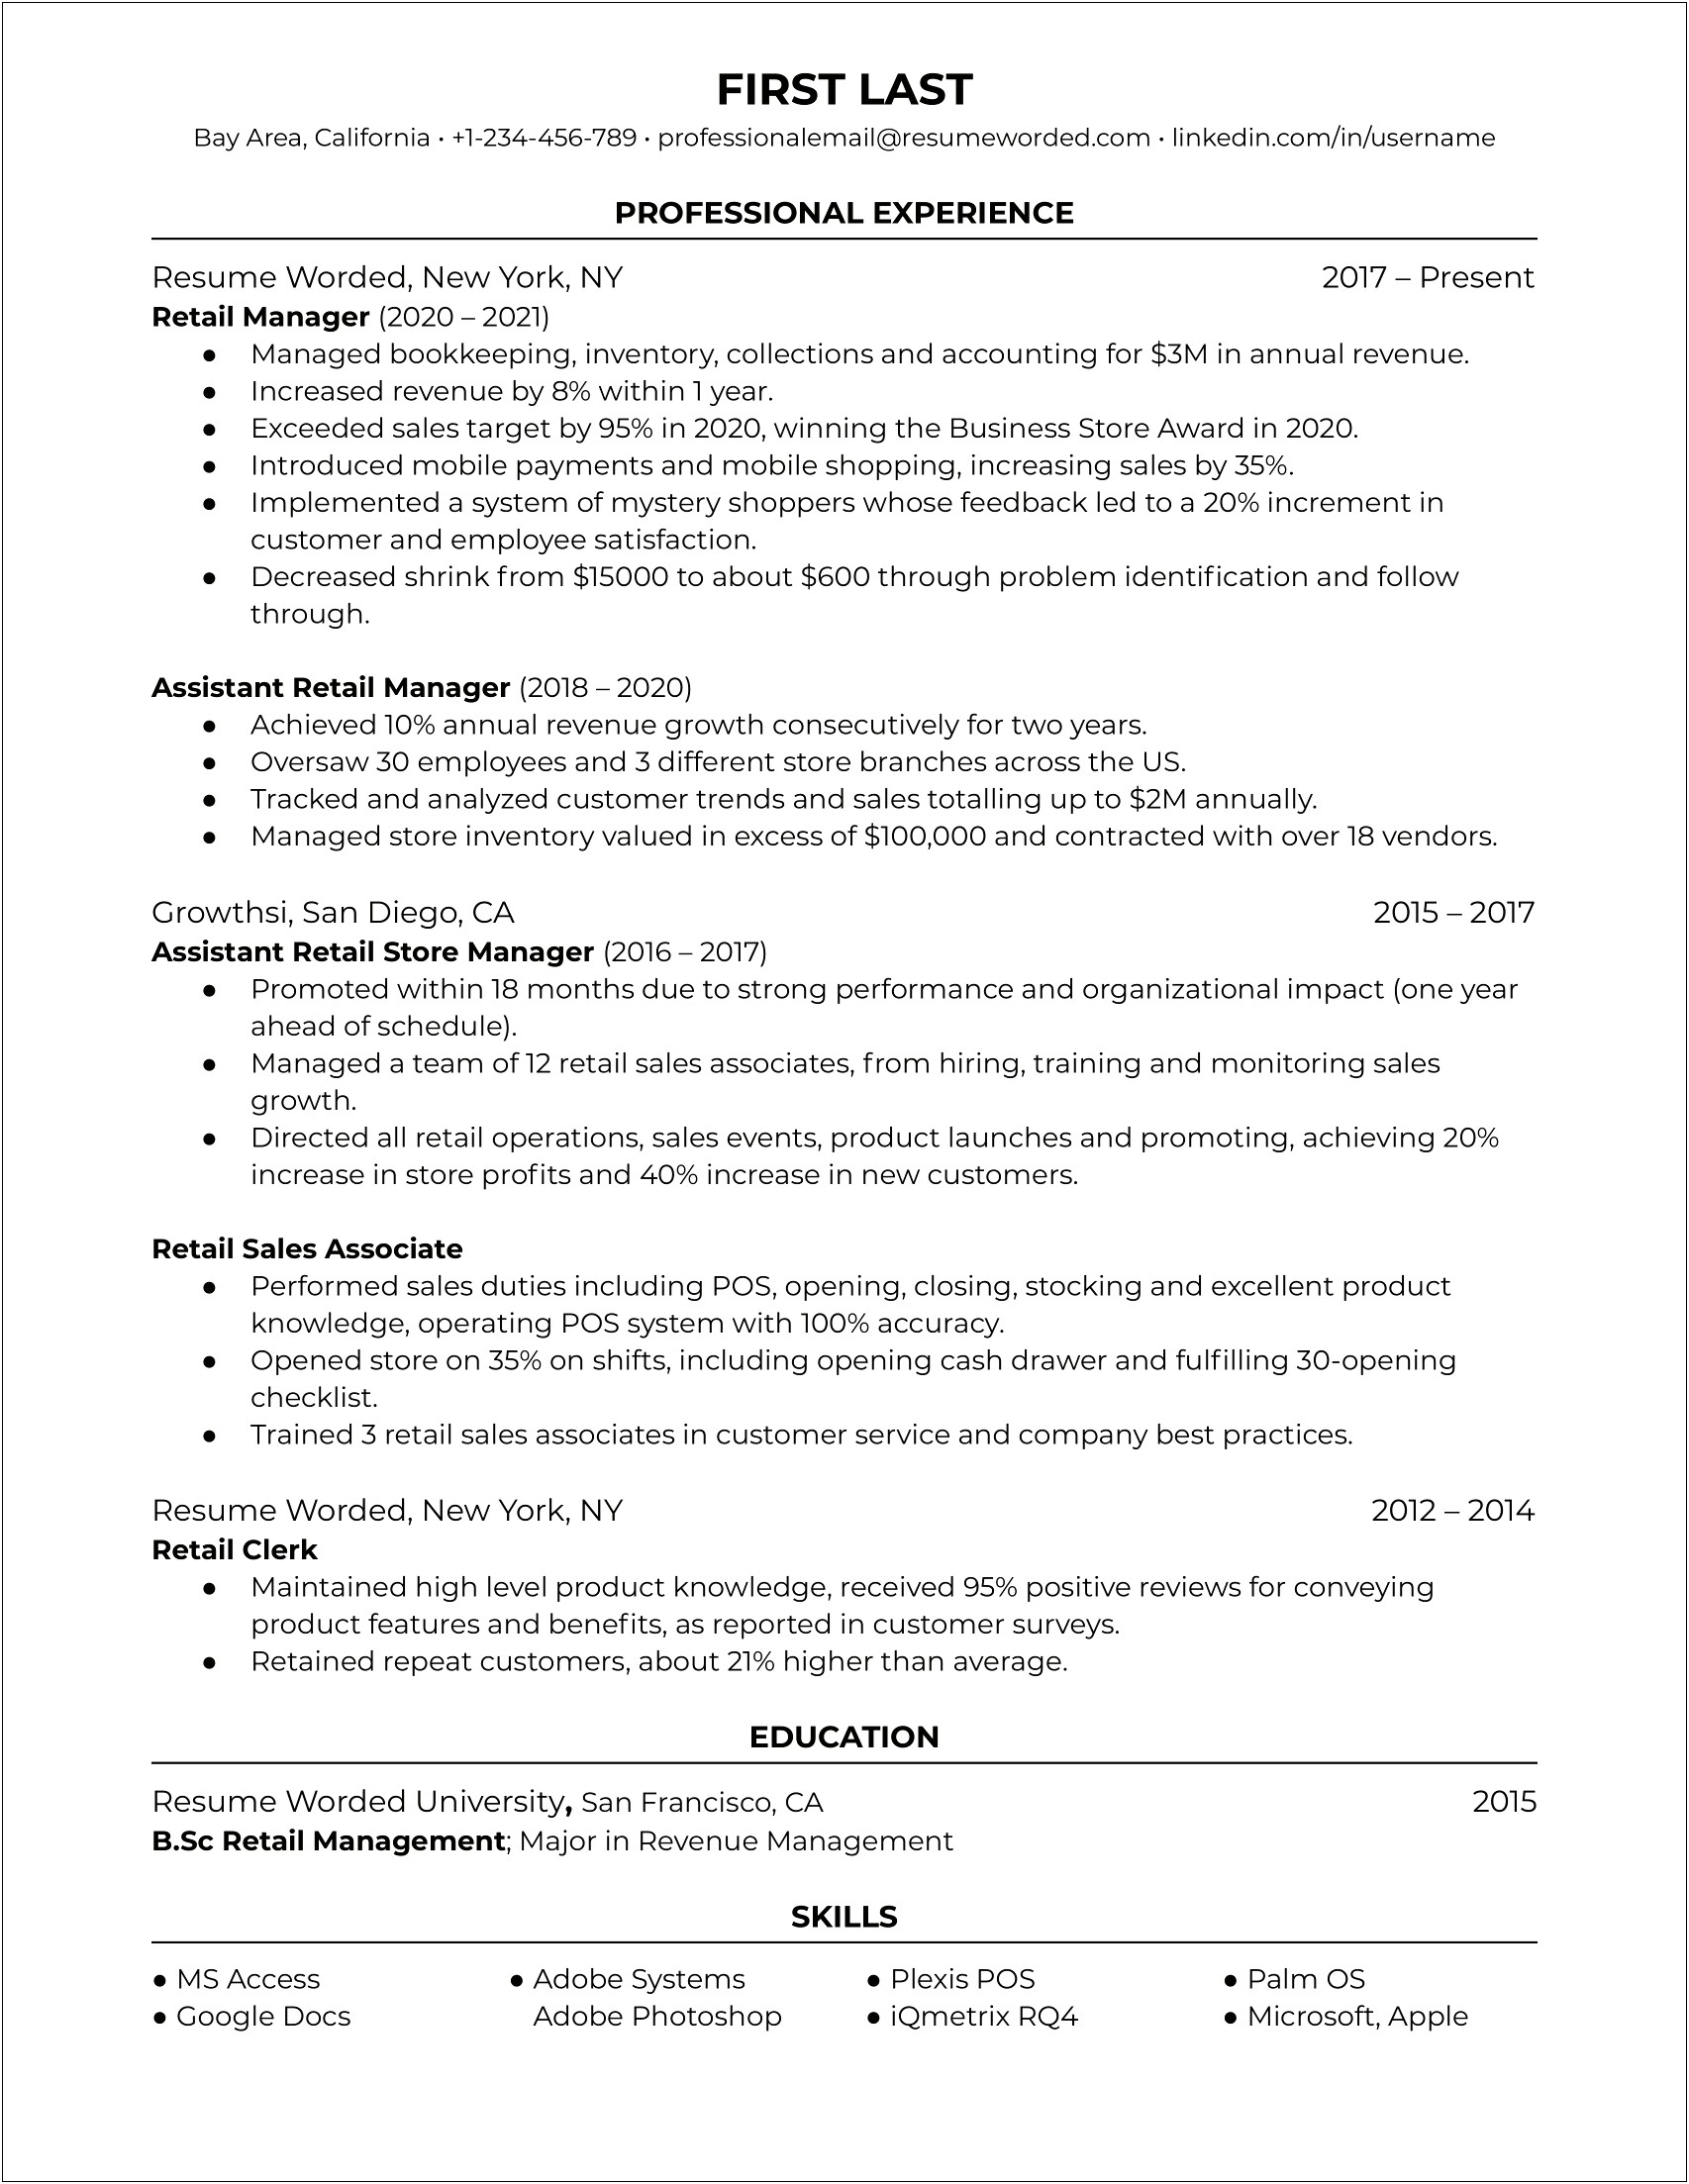 Resume Work Experience Examples For Retail